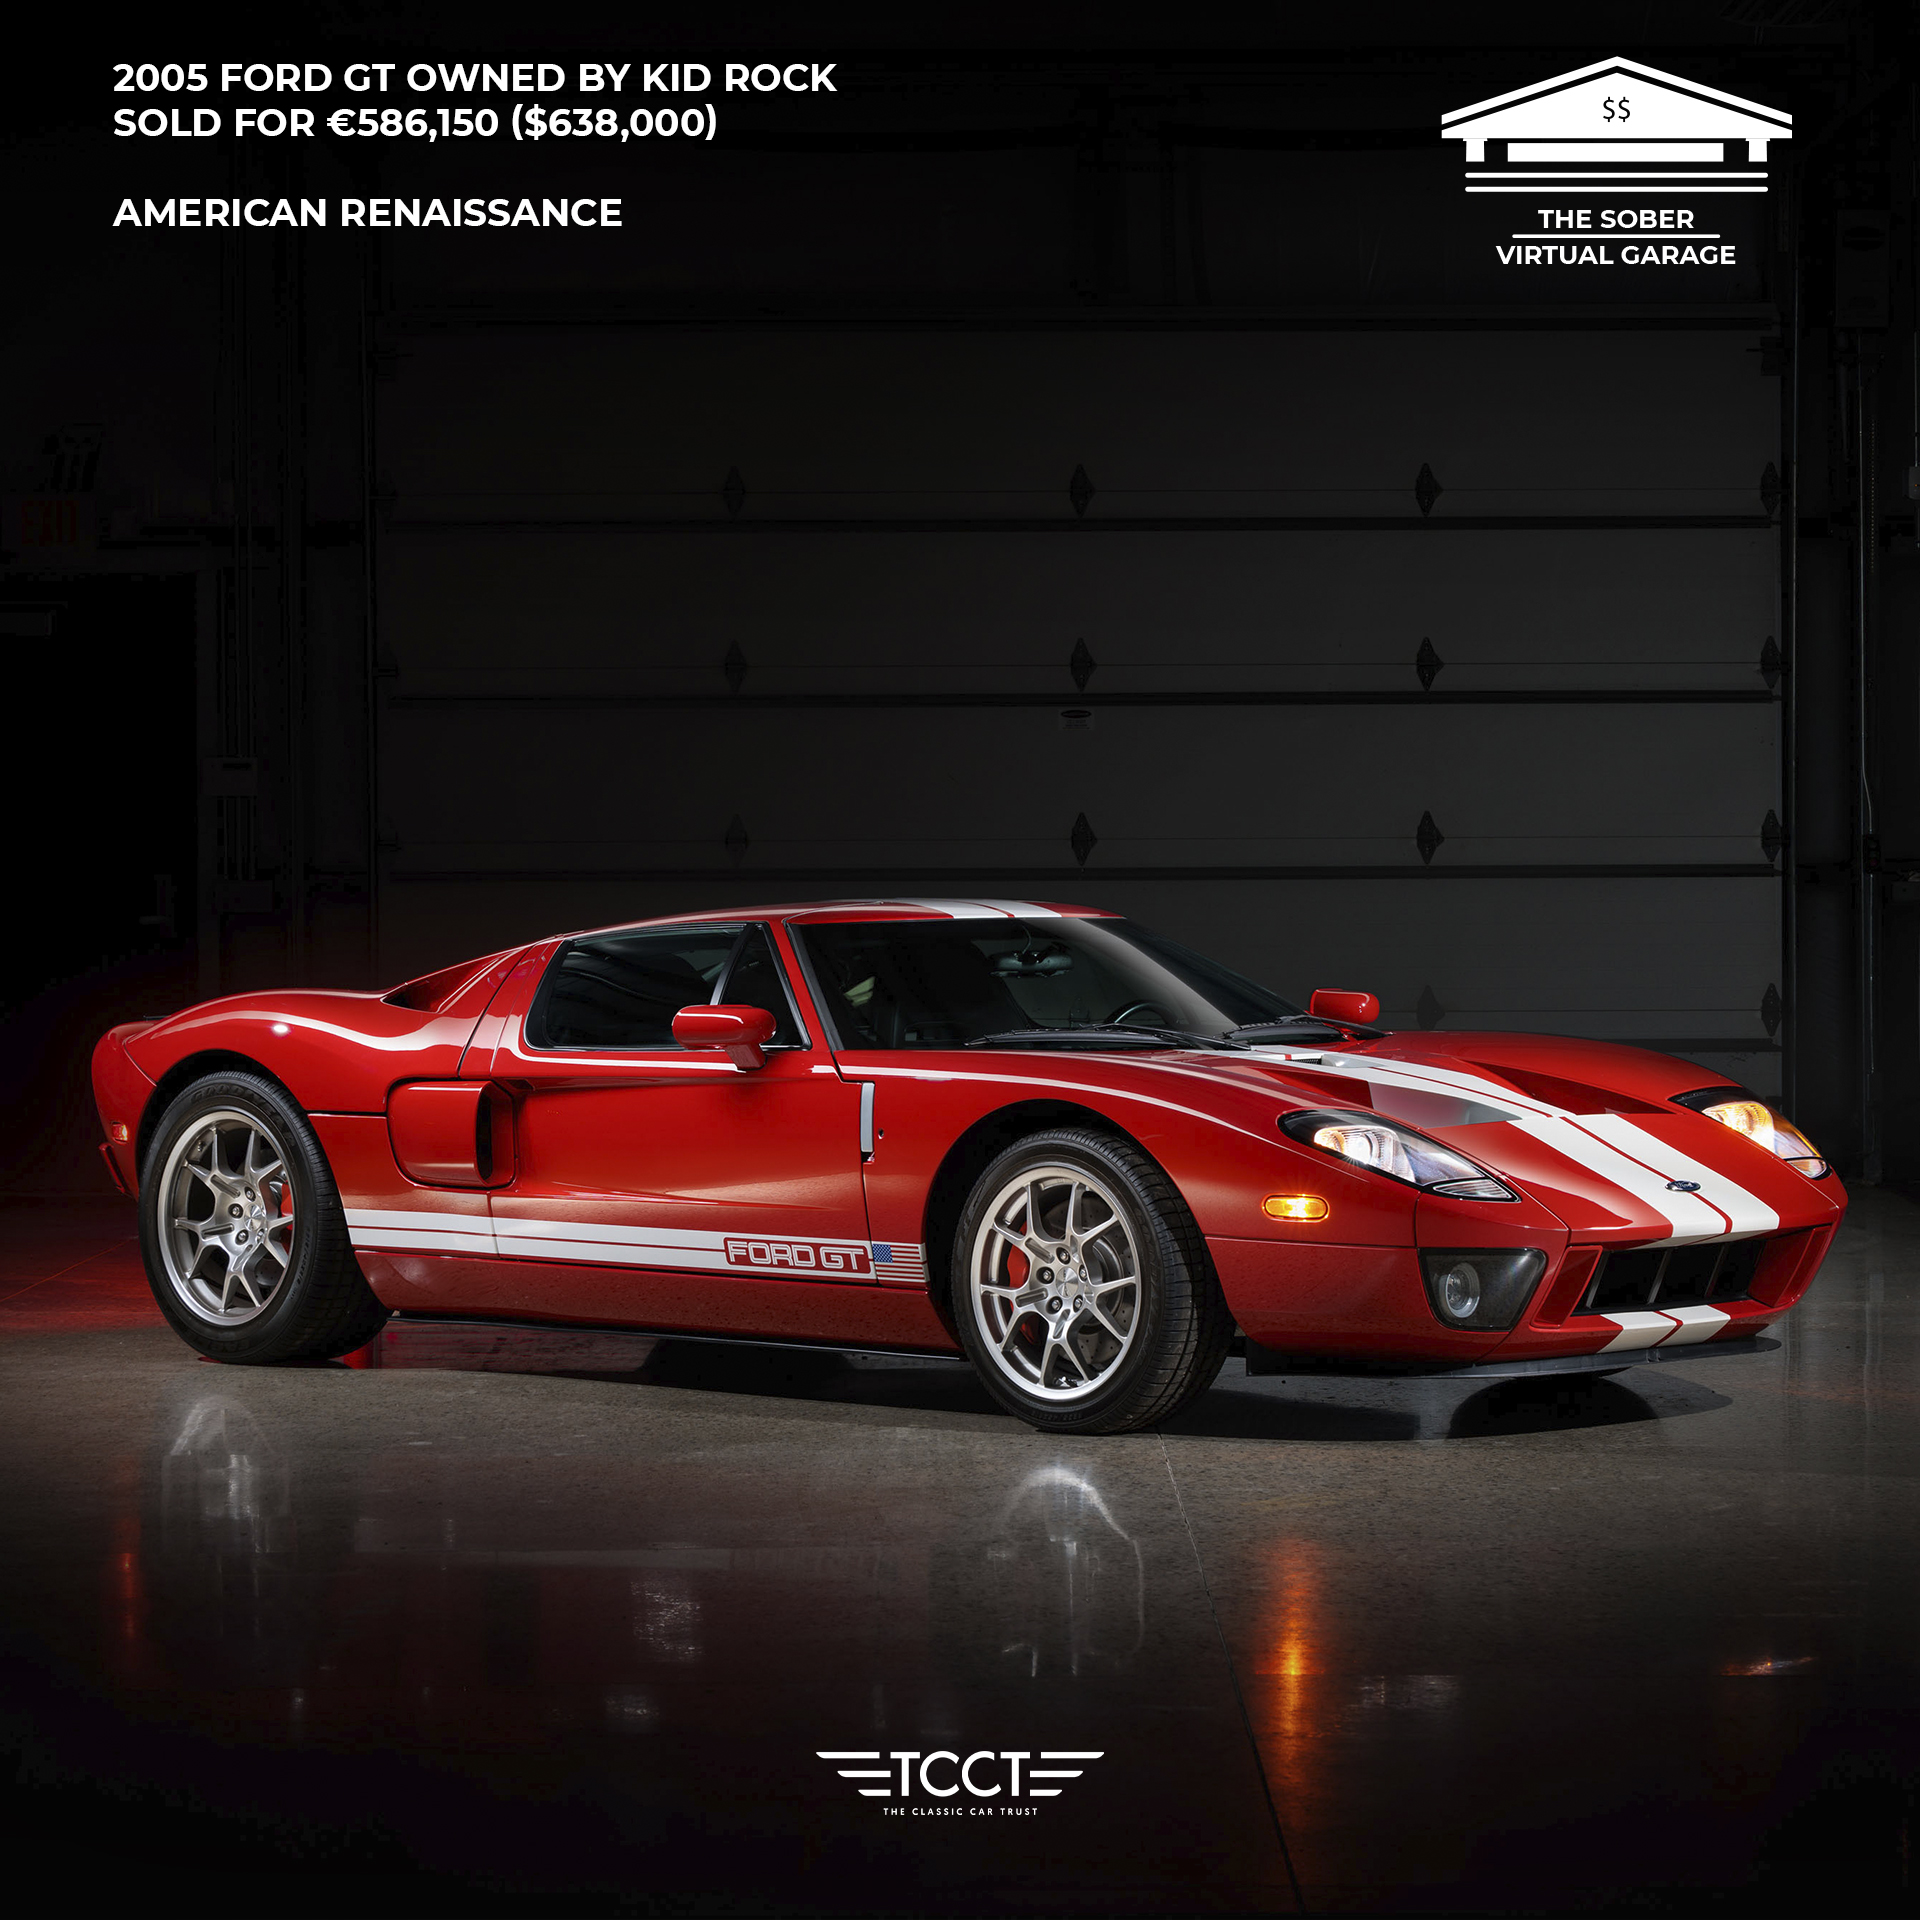 5-2005-Ford-GT-Owned-by-Kid-Rock